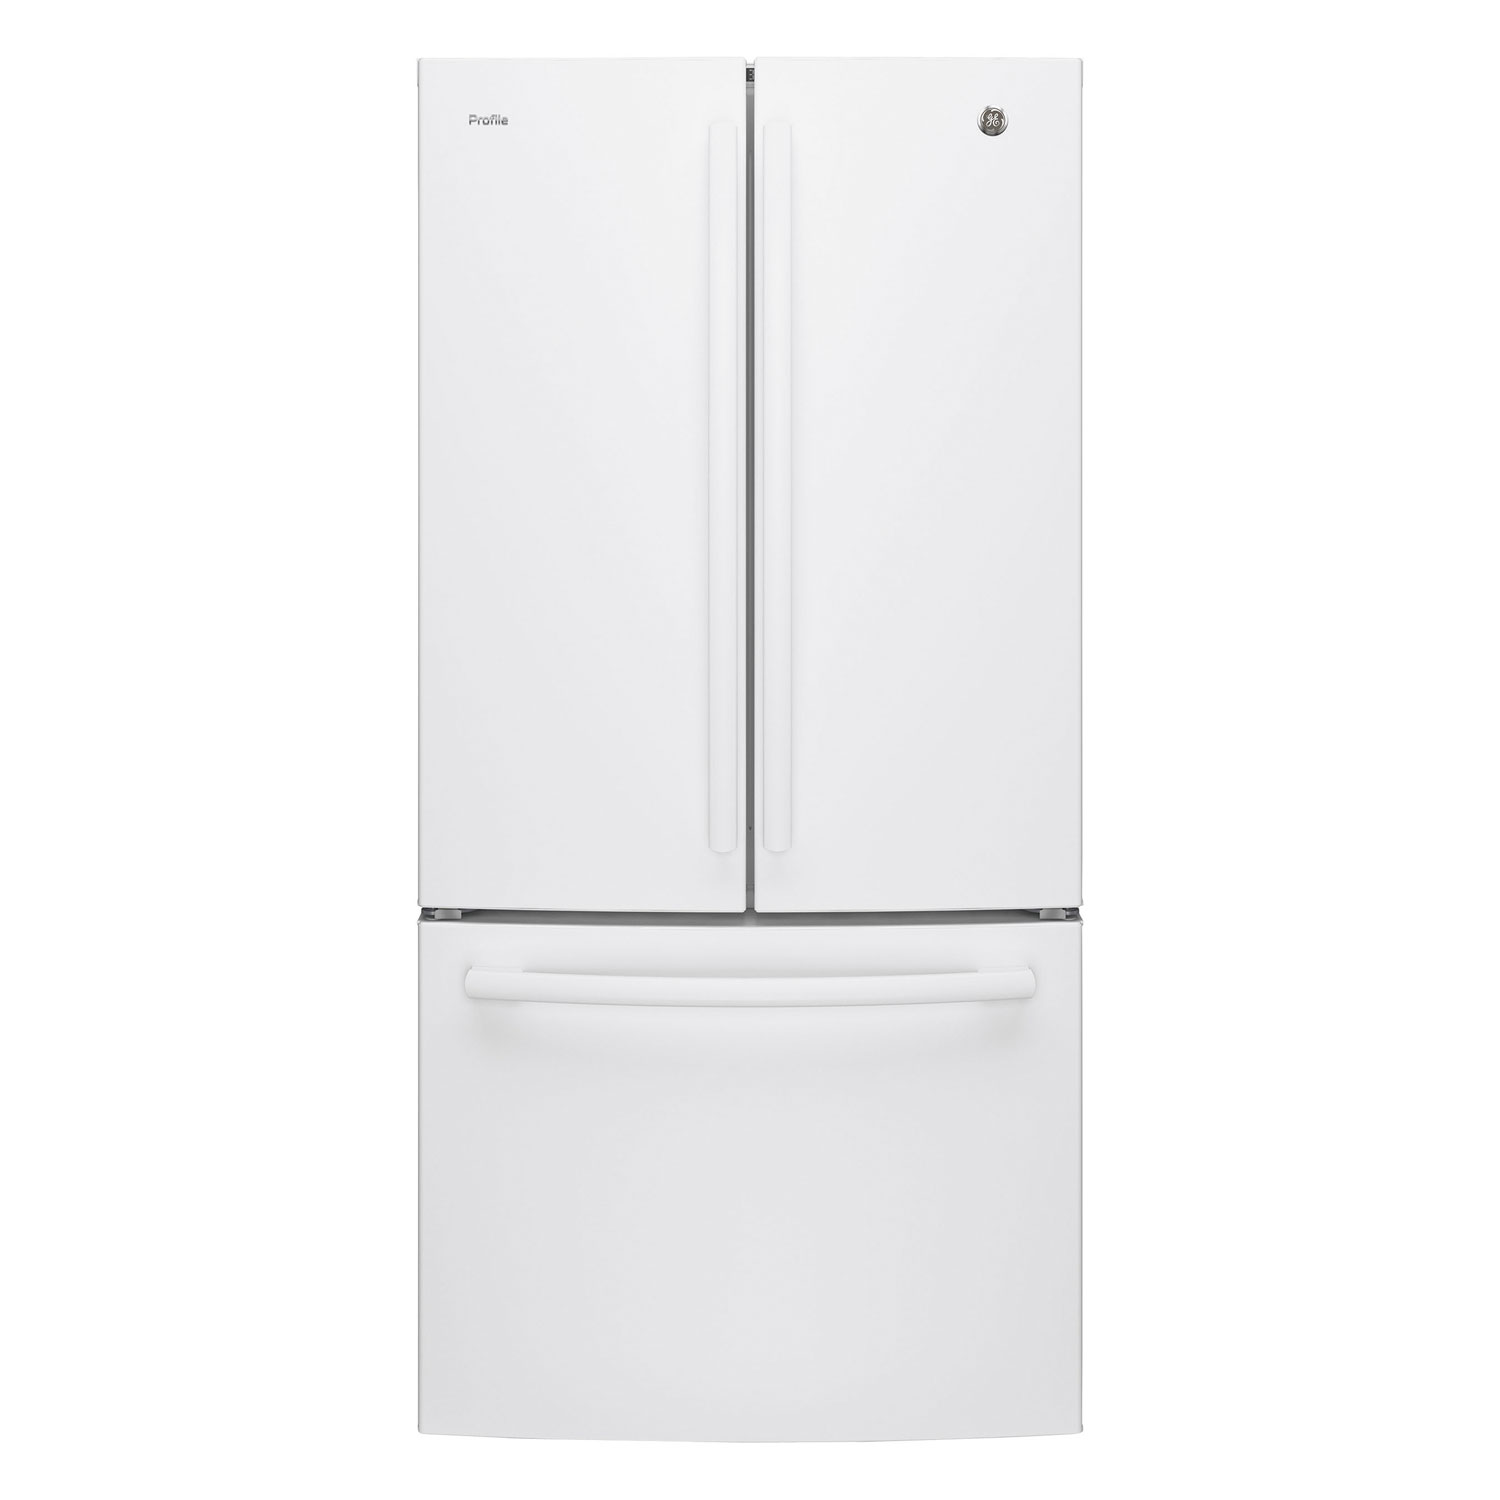 GE Profile 33" 24.8 Cu. Ft. French Door Refrigerator with Water & Ice Dispenser (PNE25NGLKWW)-White